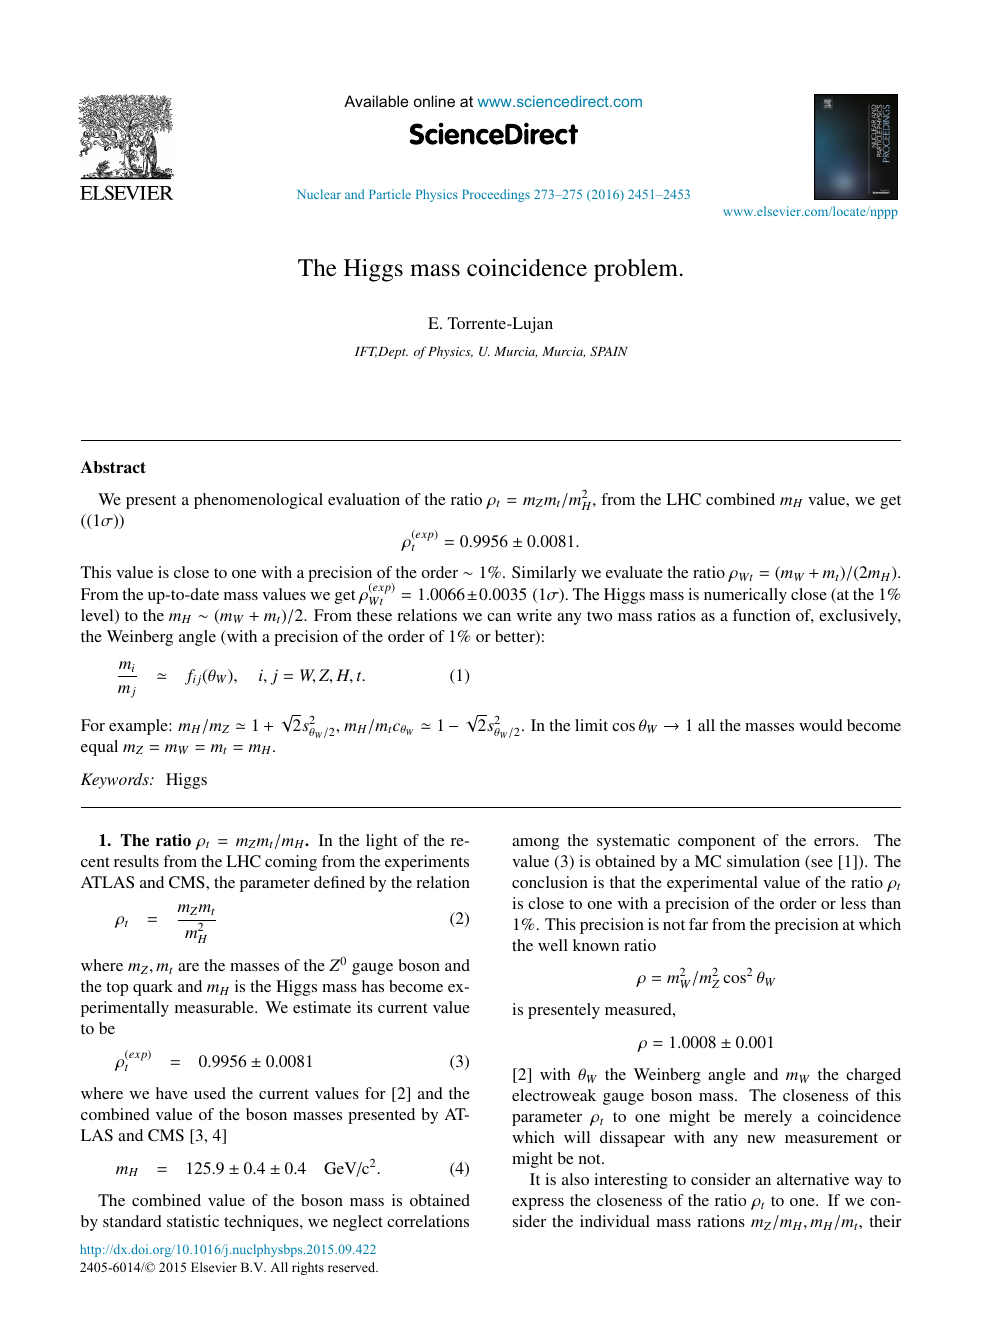 The Higgs Mass Coincidence Problem Topic Of Research Paper In Physical Sciences Download Scholarly Article Pdf And Read For Free On Cyberleninka Open Science Hub